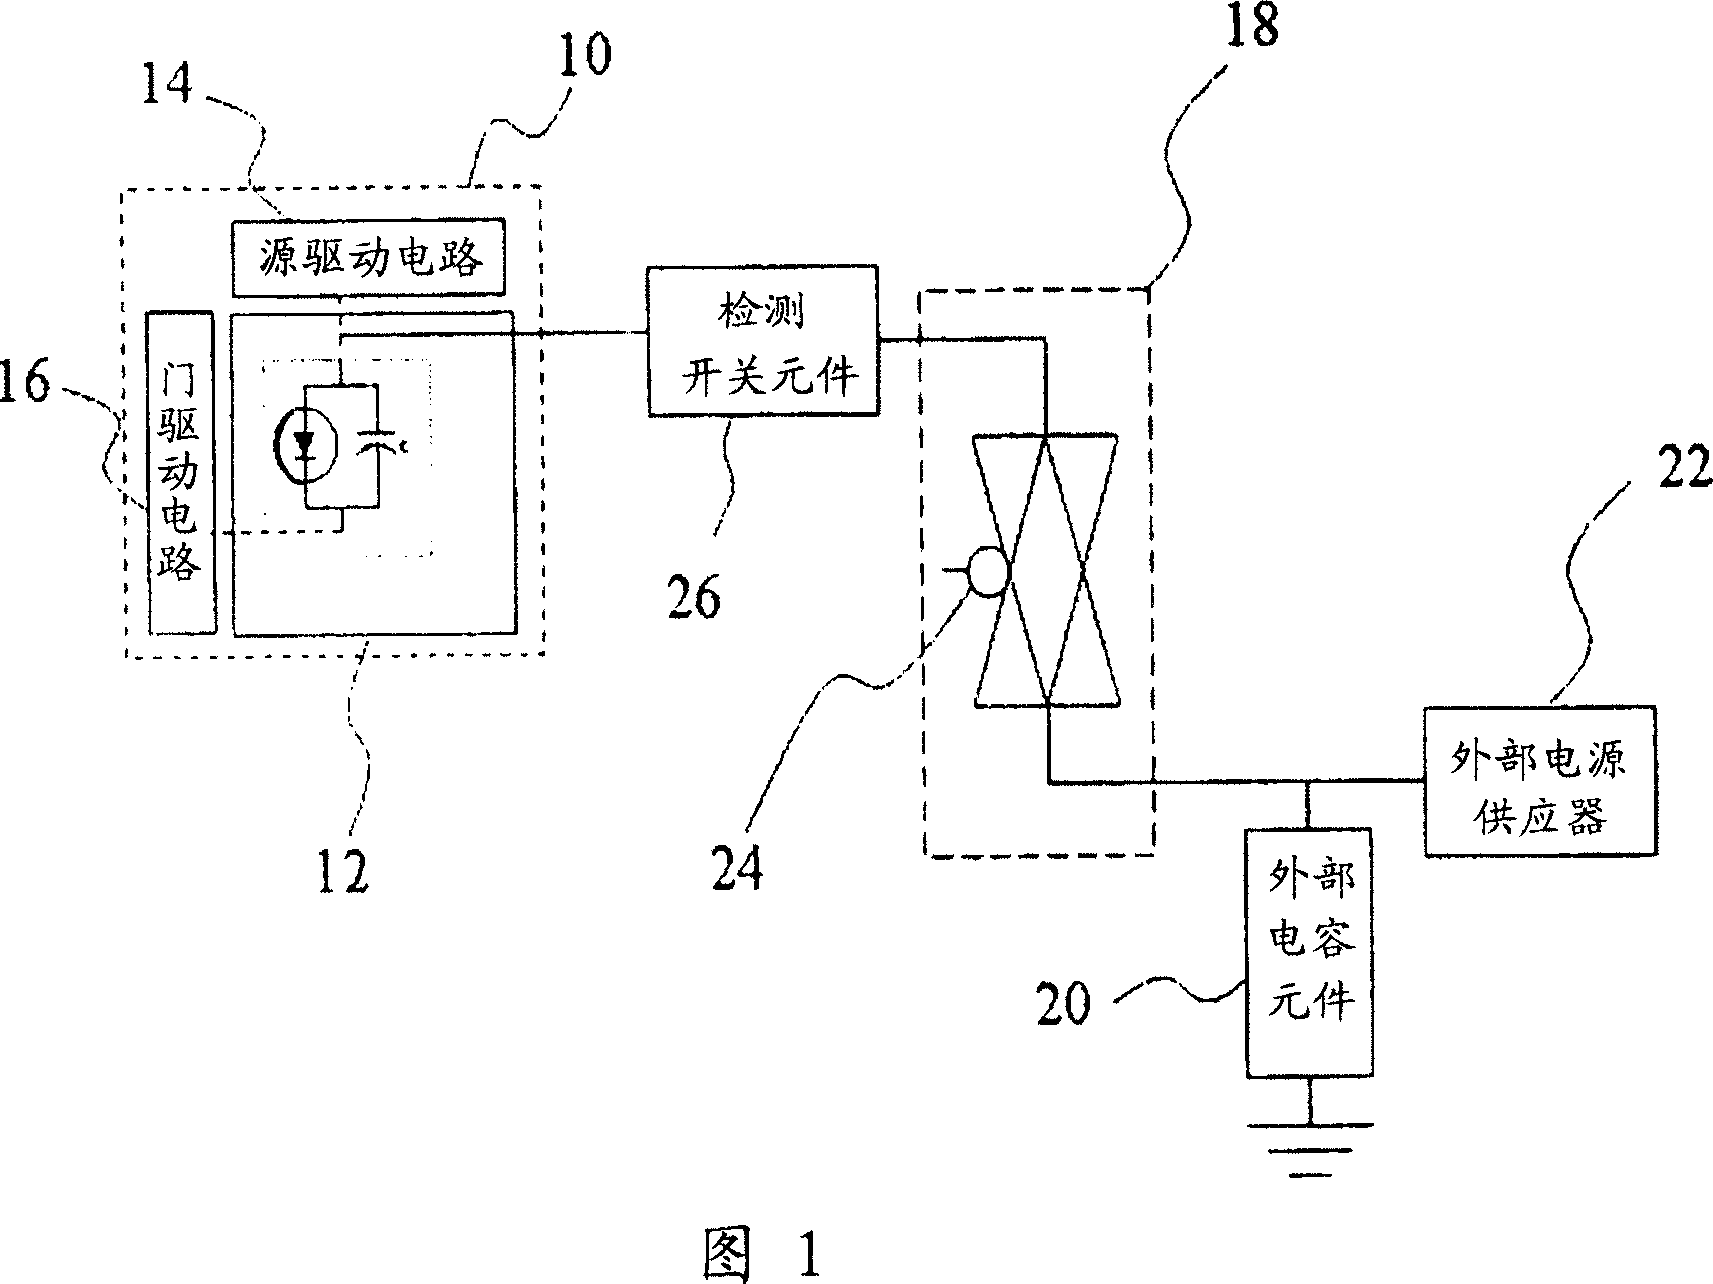 Electric charge recovery circulating circuit of display equipment